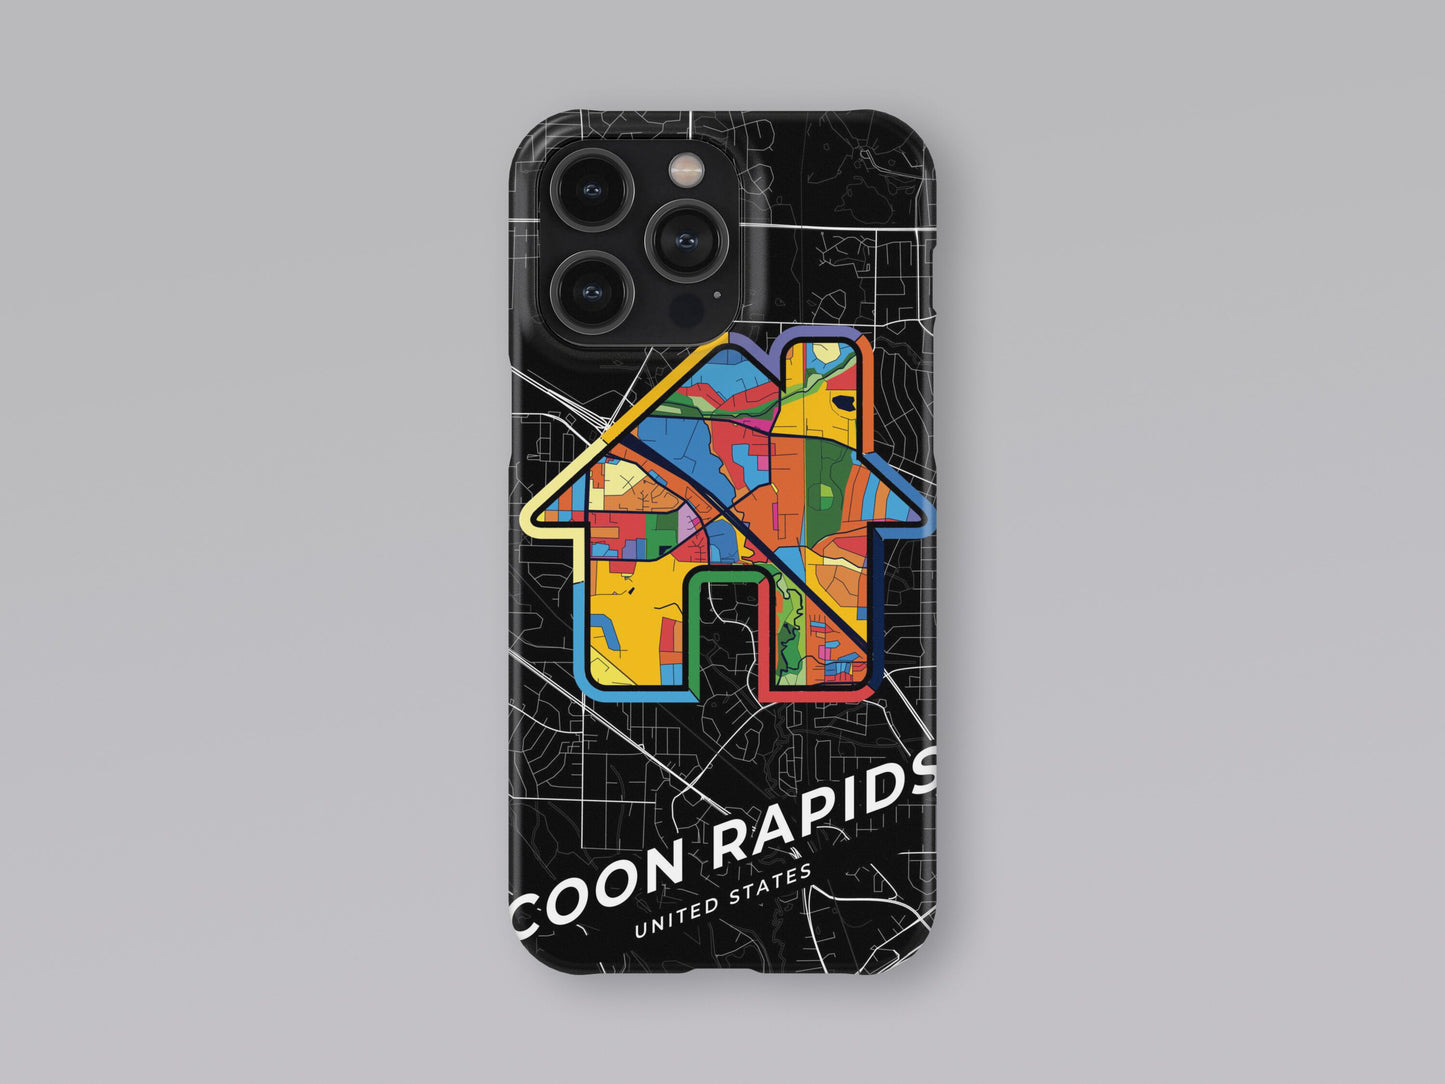 Coon Rapids Minnesota slim phone case with colorful icon. Birthday, wedding or housewarming gift. Couple match cases. 3